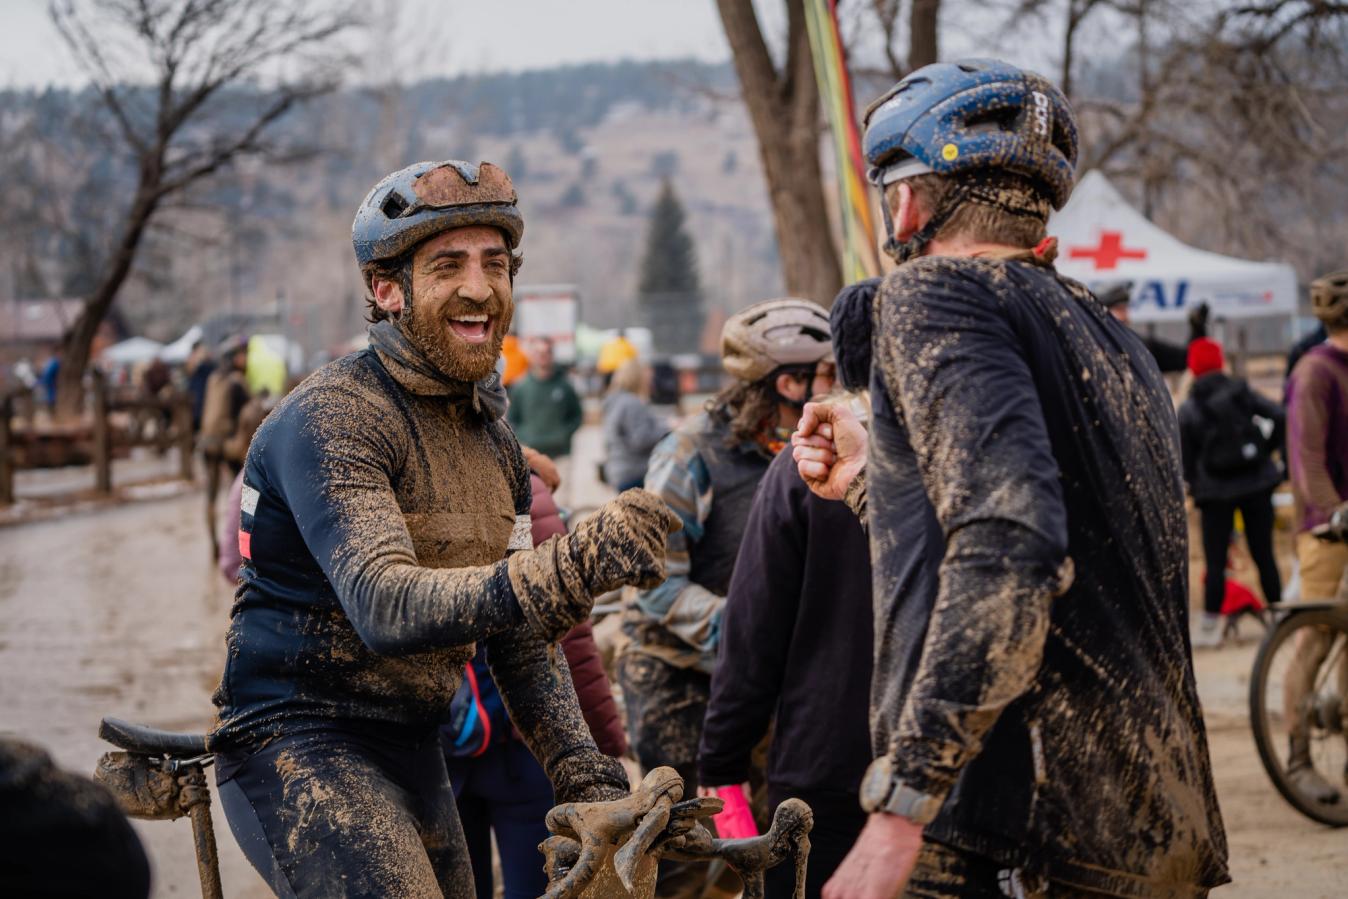 The finish line, mercifully, was not far away with the course shortening and everyone was able to wipe the mud from their faces while recounting their war stories from the race